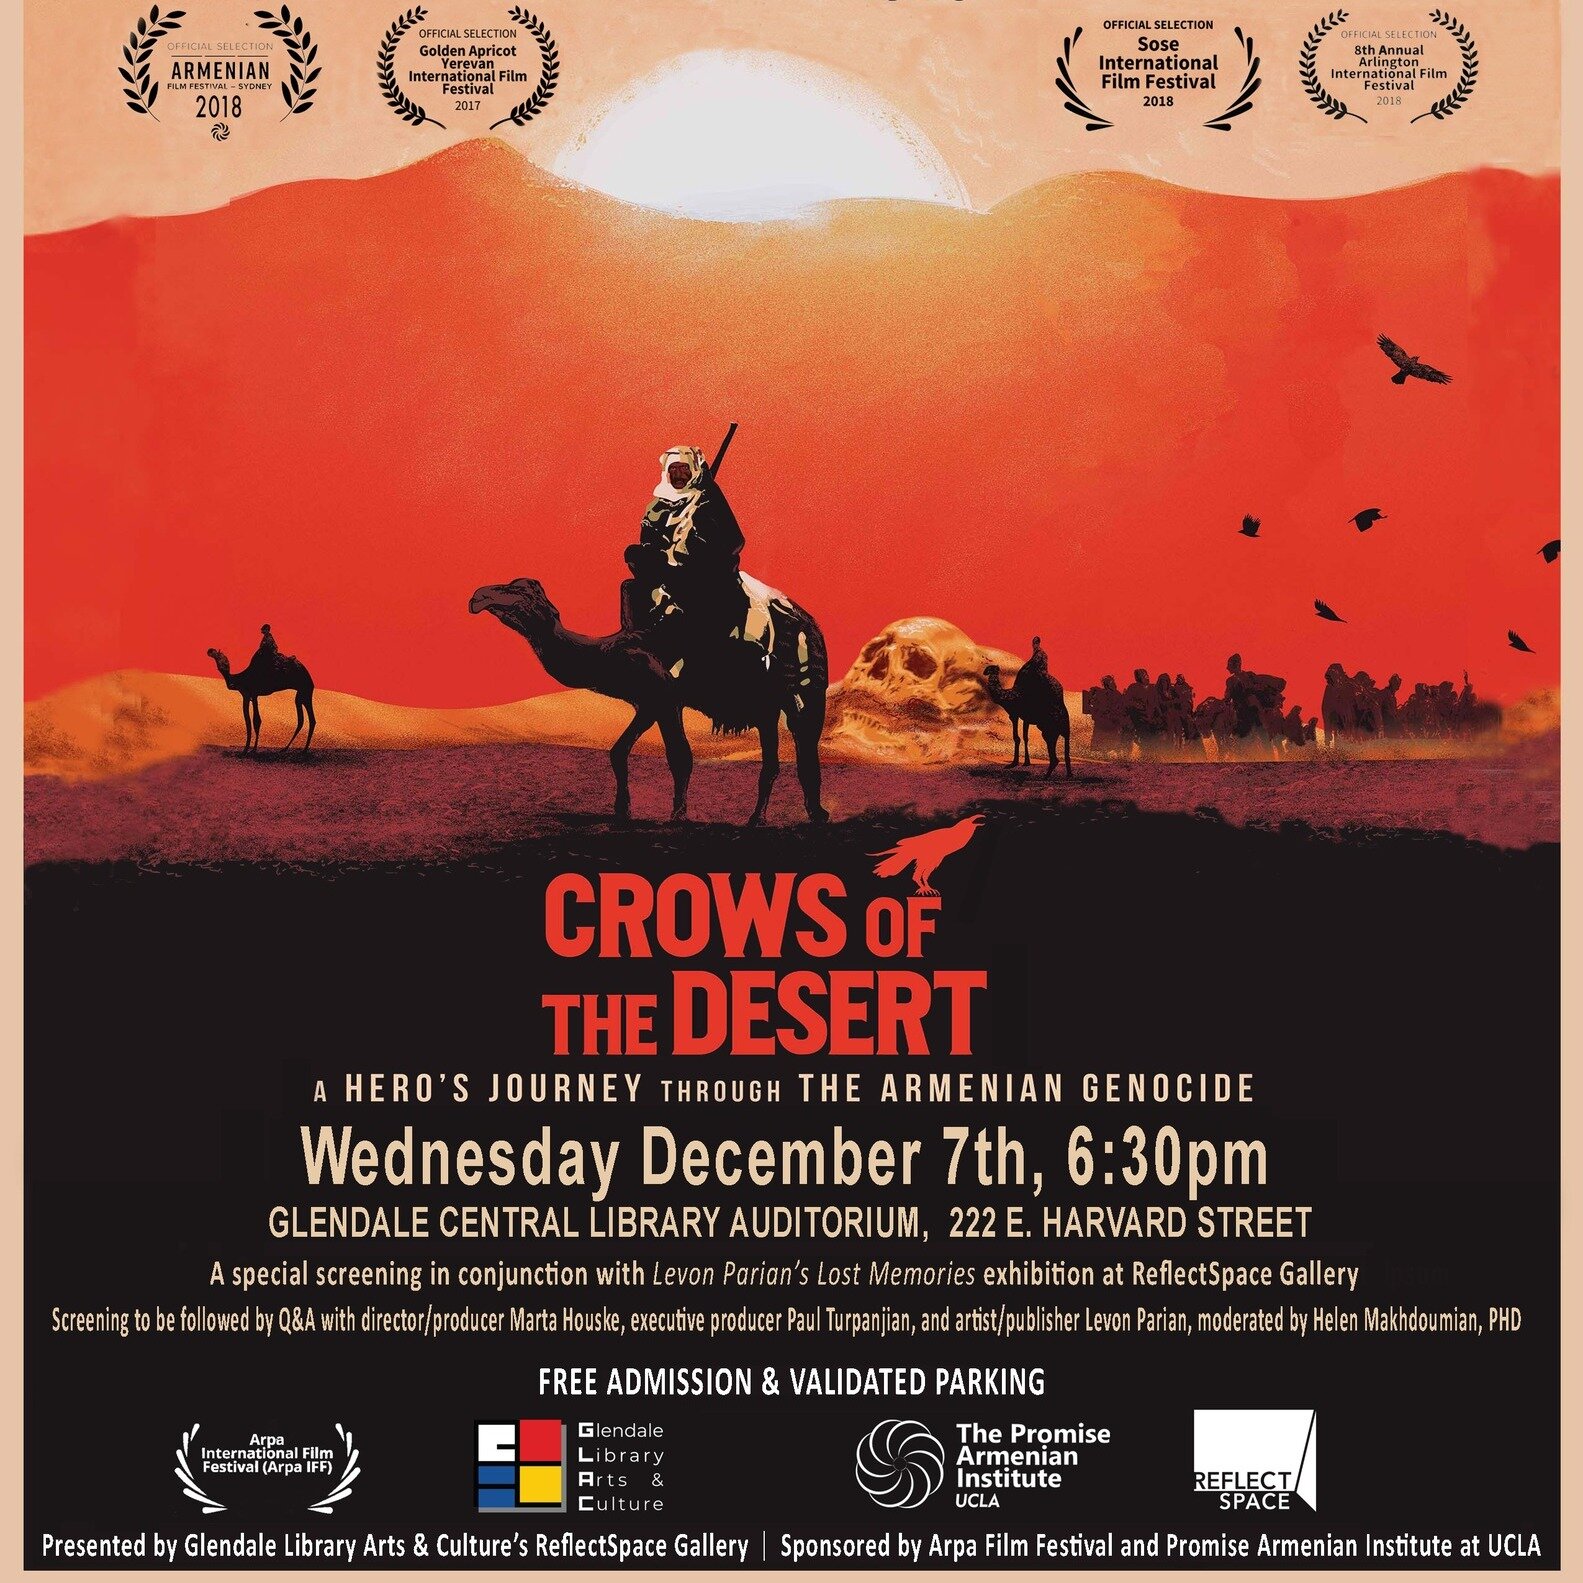 You are invited for a special film screening of Crows of the Desert!

📅 Glendale Central Library | December 7,6:30PM
💵Free admission
🚗3 Free parking at MarketPlace Parking structure (Harvard Street)

Helen Makhdoumian, Ph.D., of the Armenian Promi